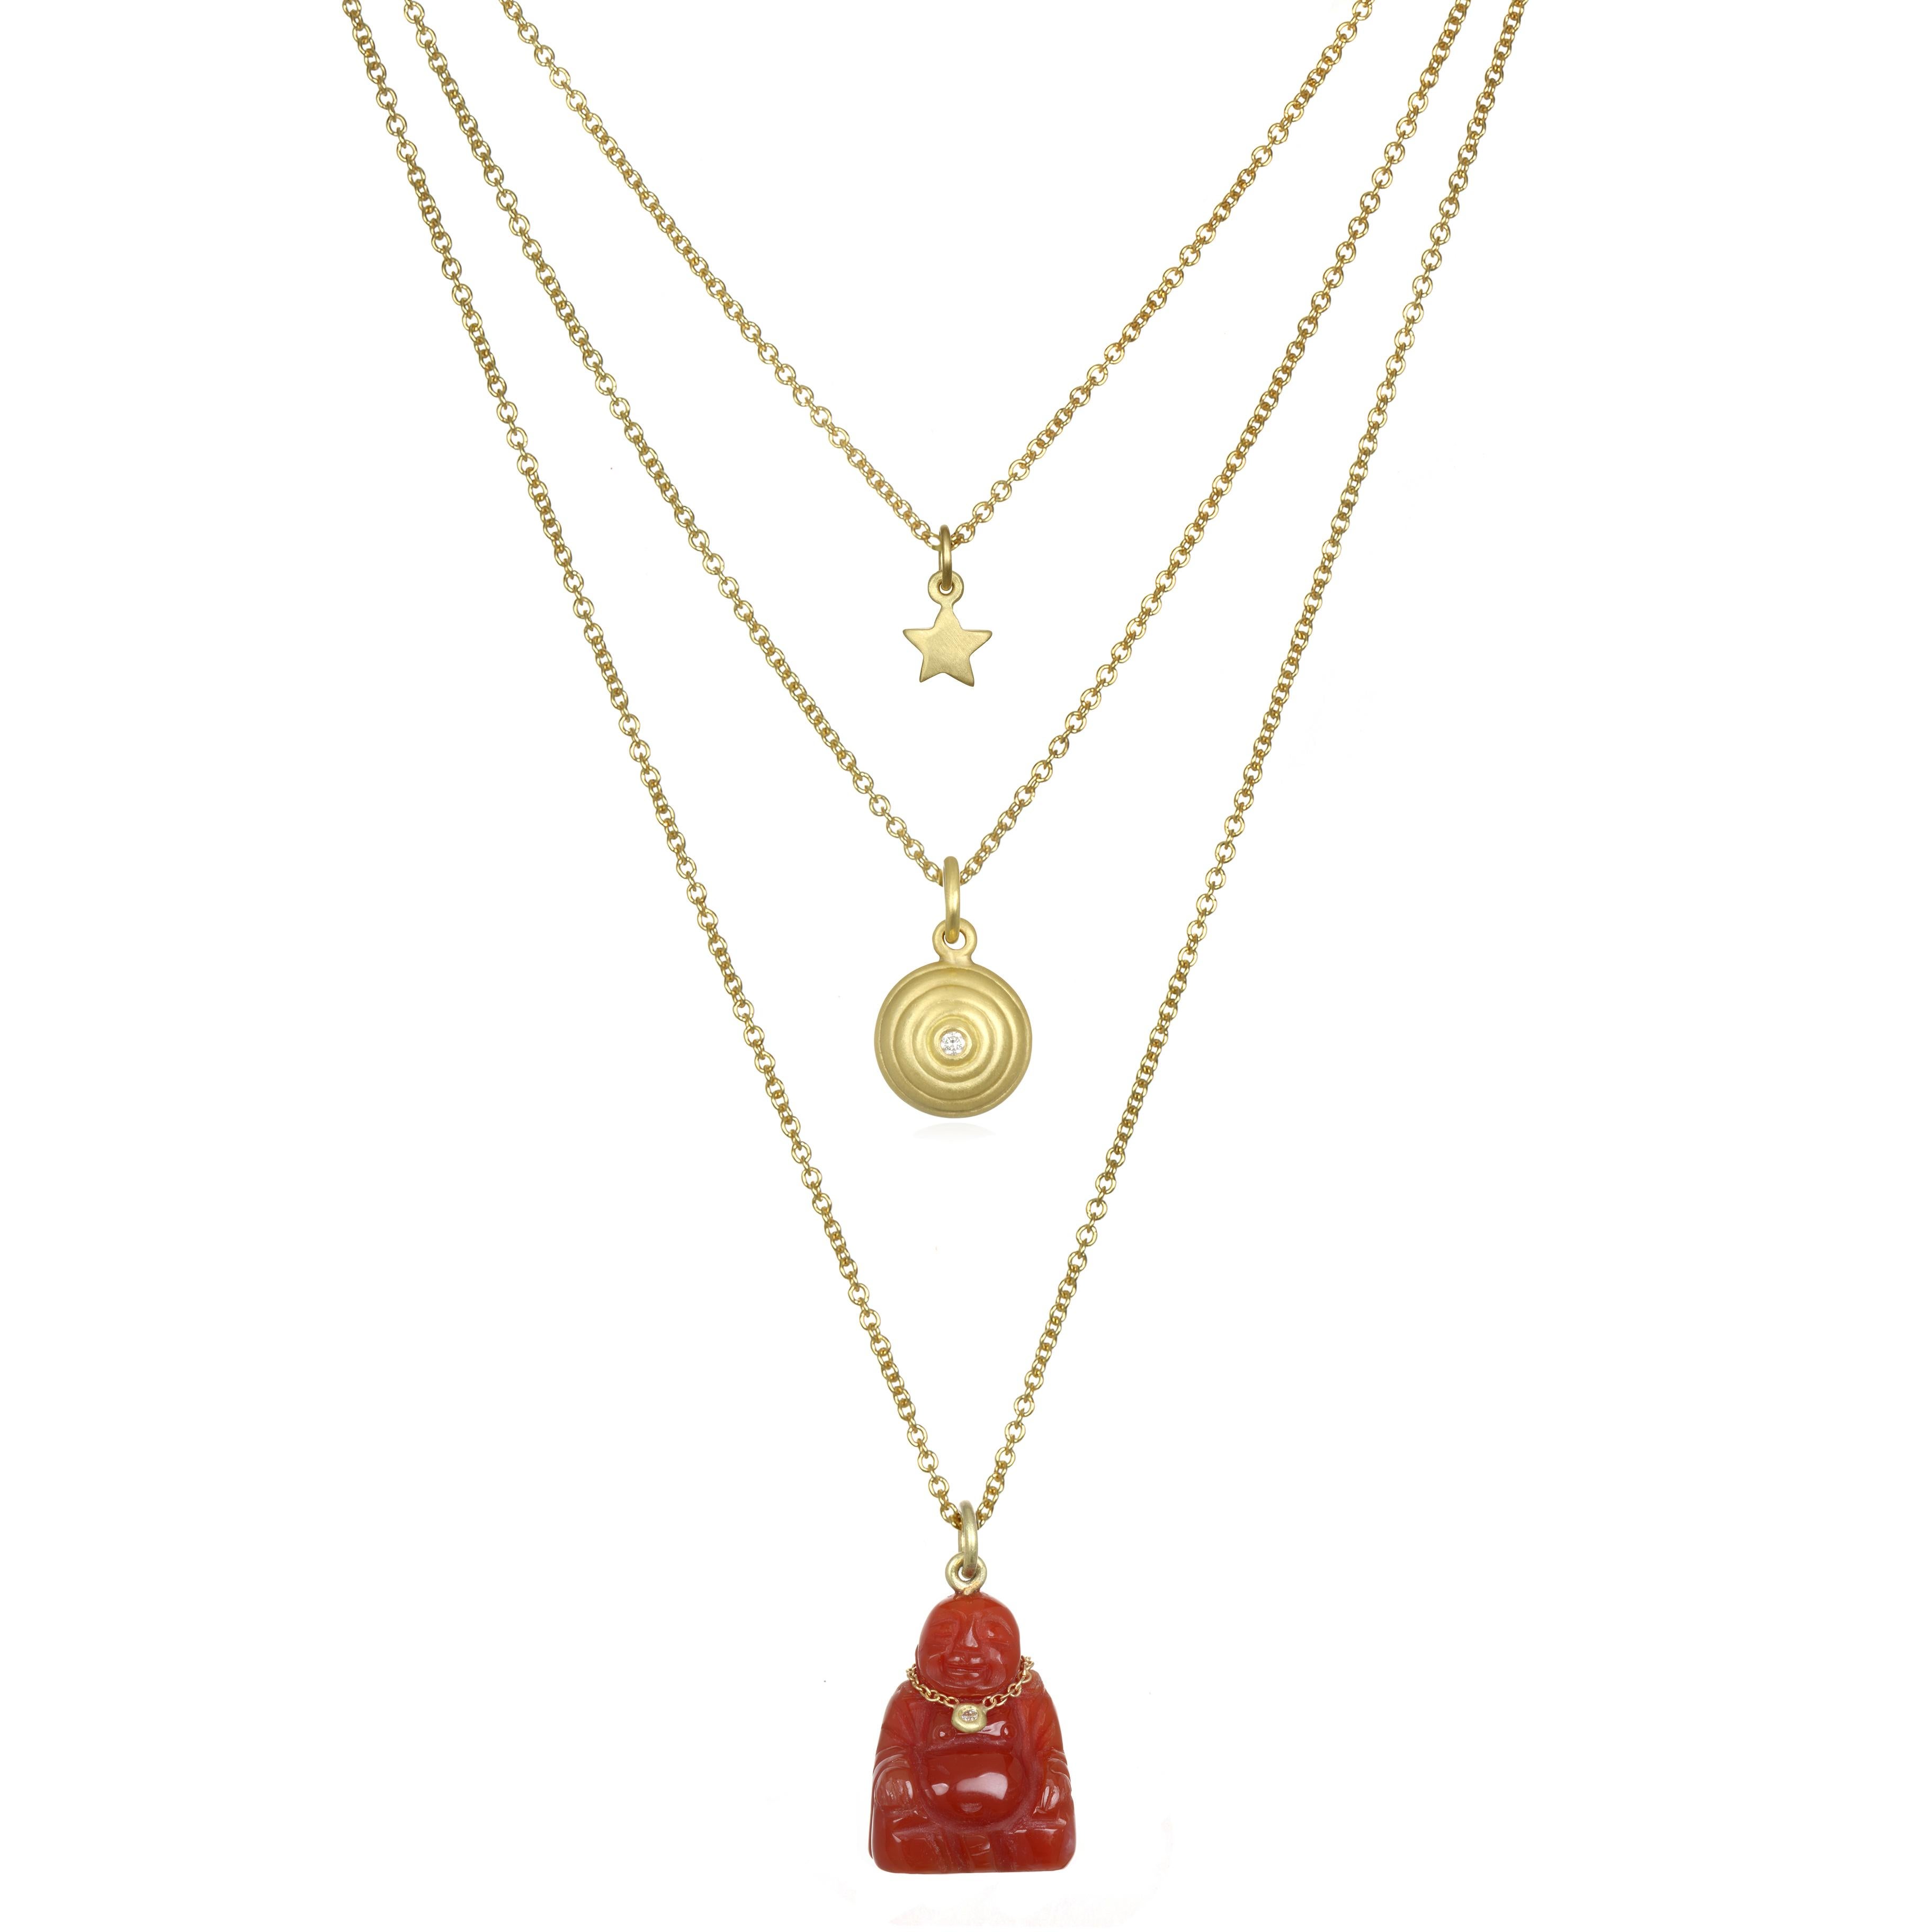 A symbol of longevity, enlightenment and love our Carnelian buddha pendant is complete with its very own diamond necklace. It is sure to add a distinctive sparkle in your life! Sold on 16-18